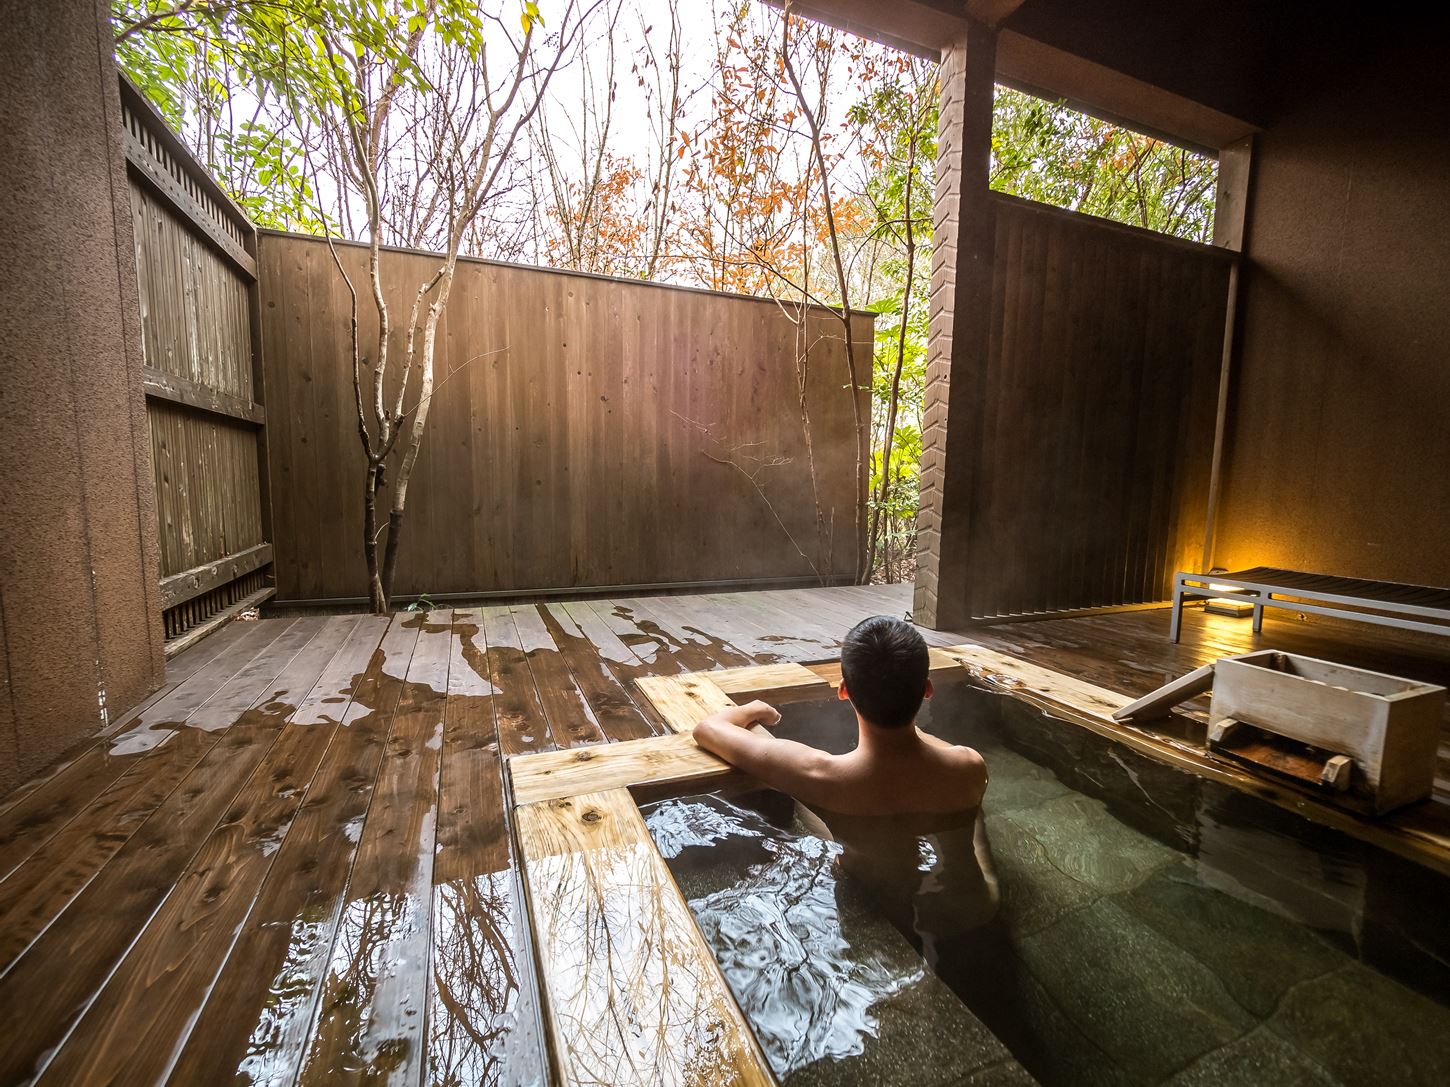 Many Ryokans (Japanese-style hotels) in Yufuin have elegant open-air baths = Shutterstock